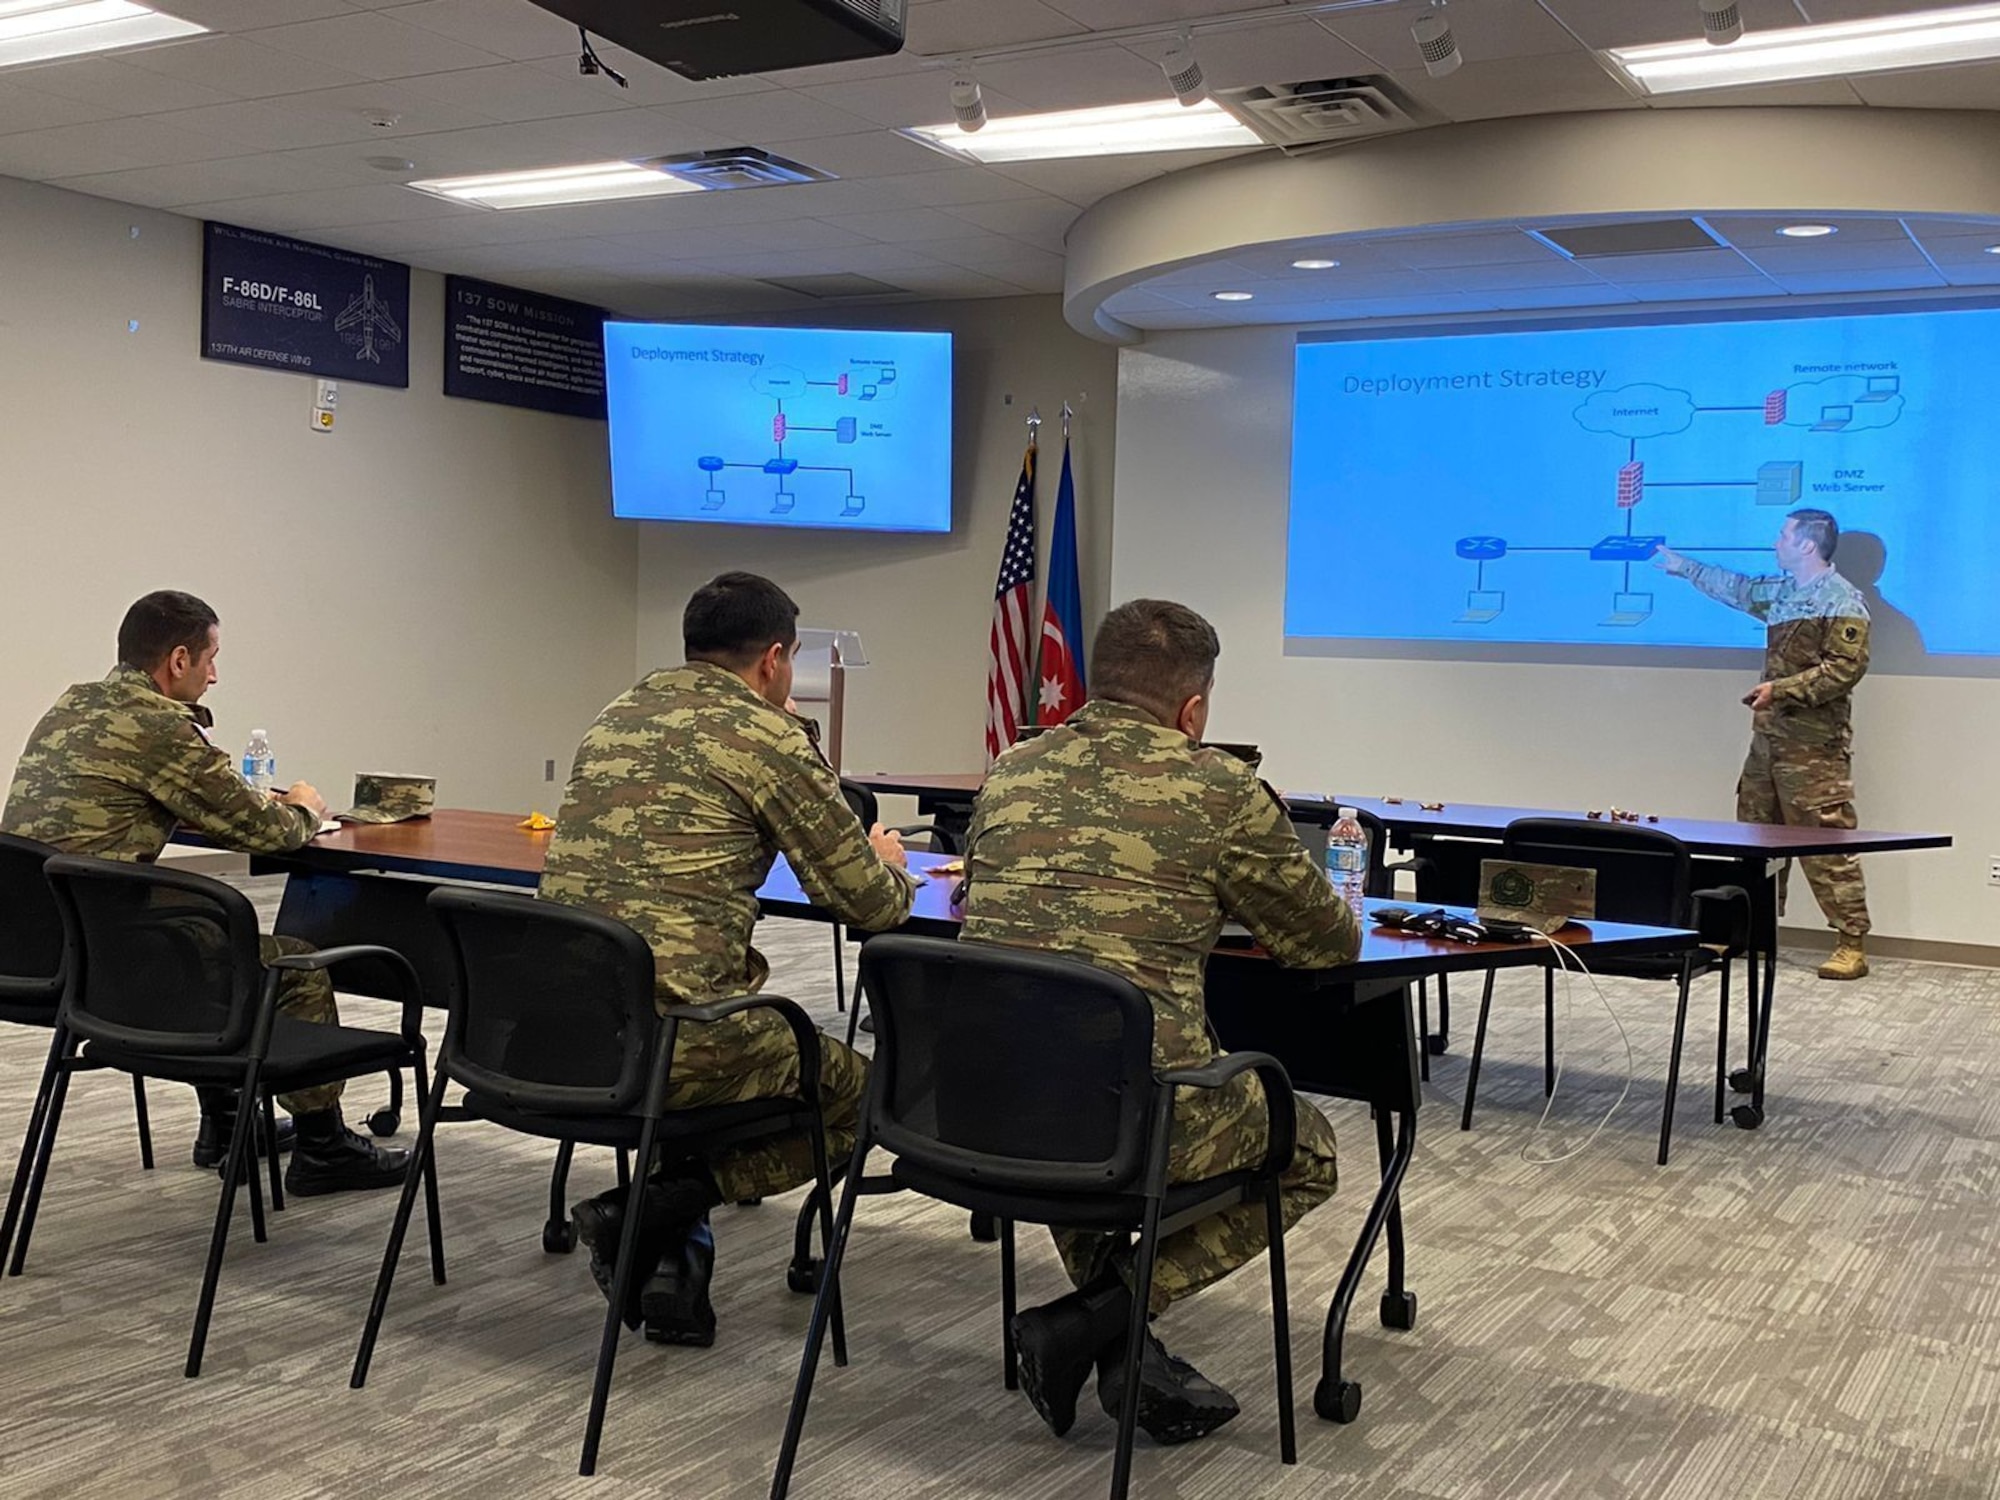 Cybersecurity officers from the Azerbaijan army listen to a presentation by an Oklahoma Air National Guard member during a cybersecurity knowledge exchange hosted by the Oklahoma National Guard at the Will Rogers Air National Guard Base in Oklahoma City. The Oklahoma National Guard hosted a multiday exchange focused on building cooperation between the two partners.